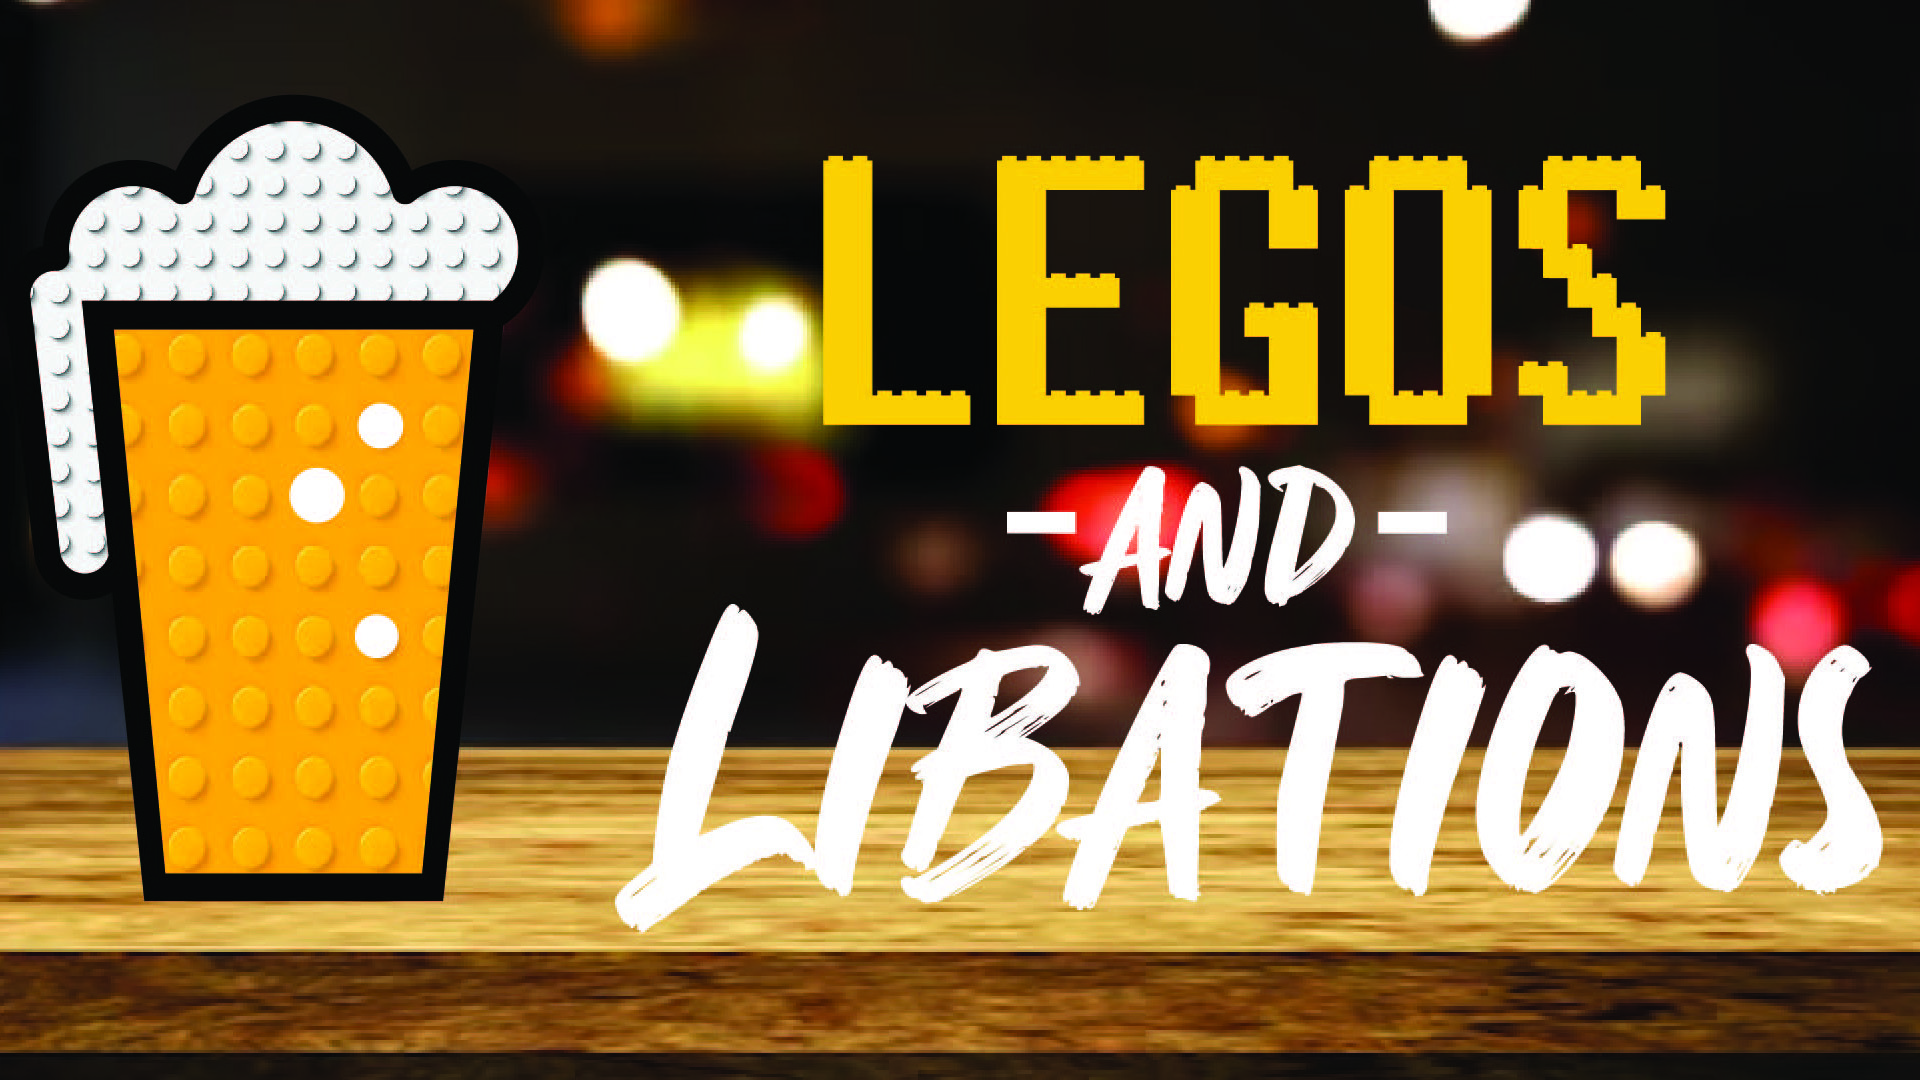 Pint of beer made of LEGOs with "LEGOS AND LIBATIONS" text